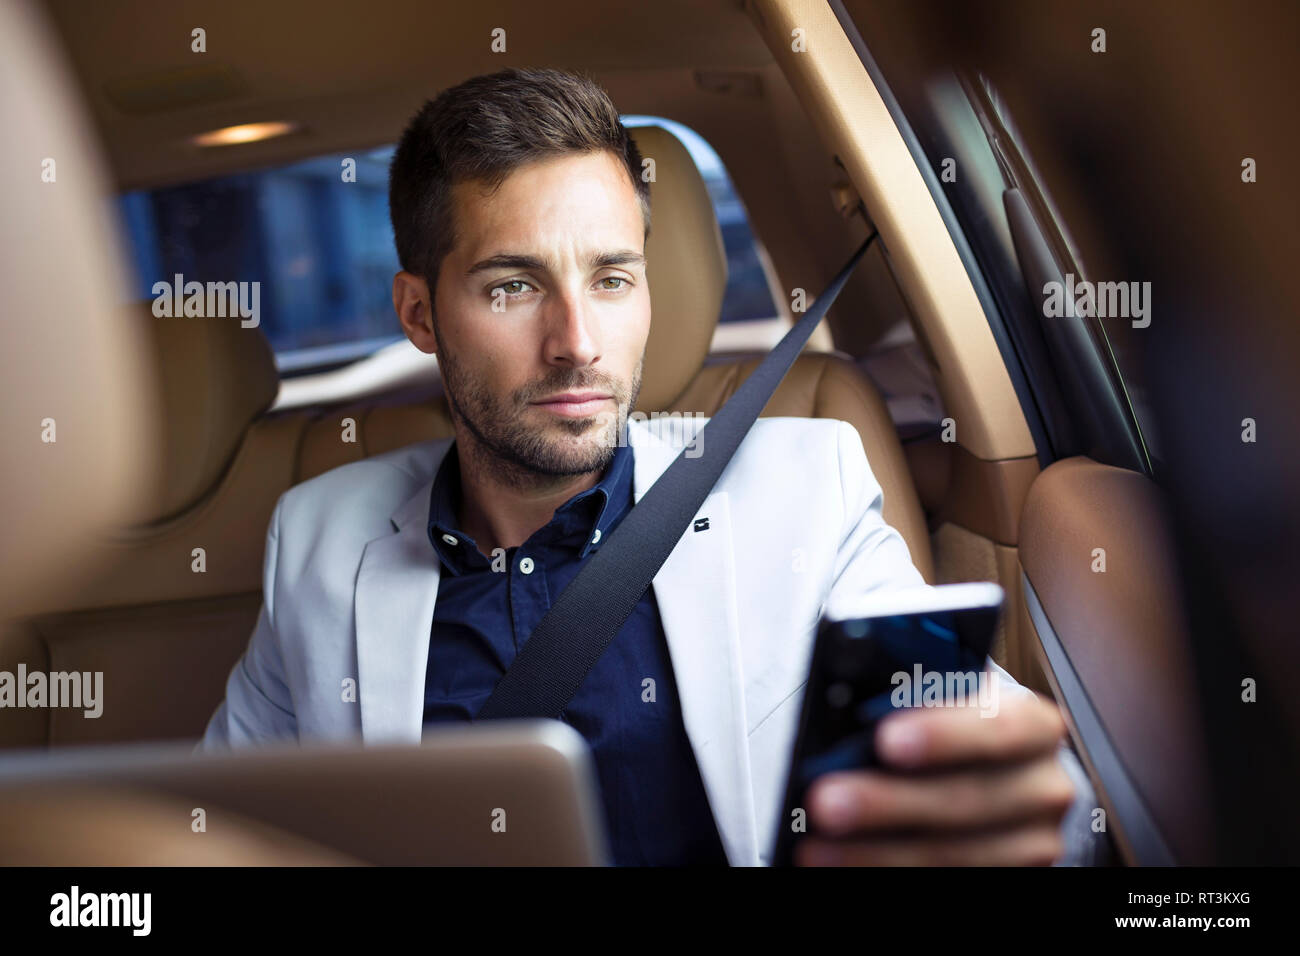 Young businessman sitting in car, using smartphone Stock Photo